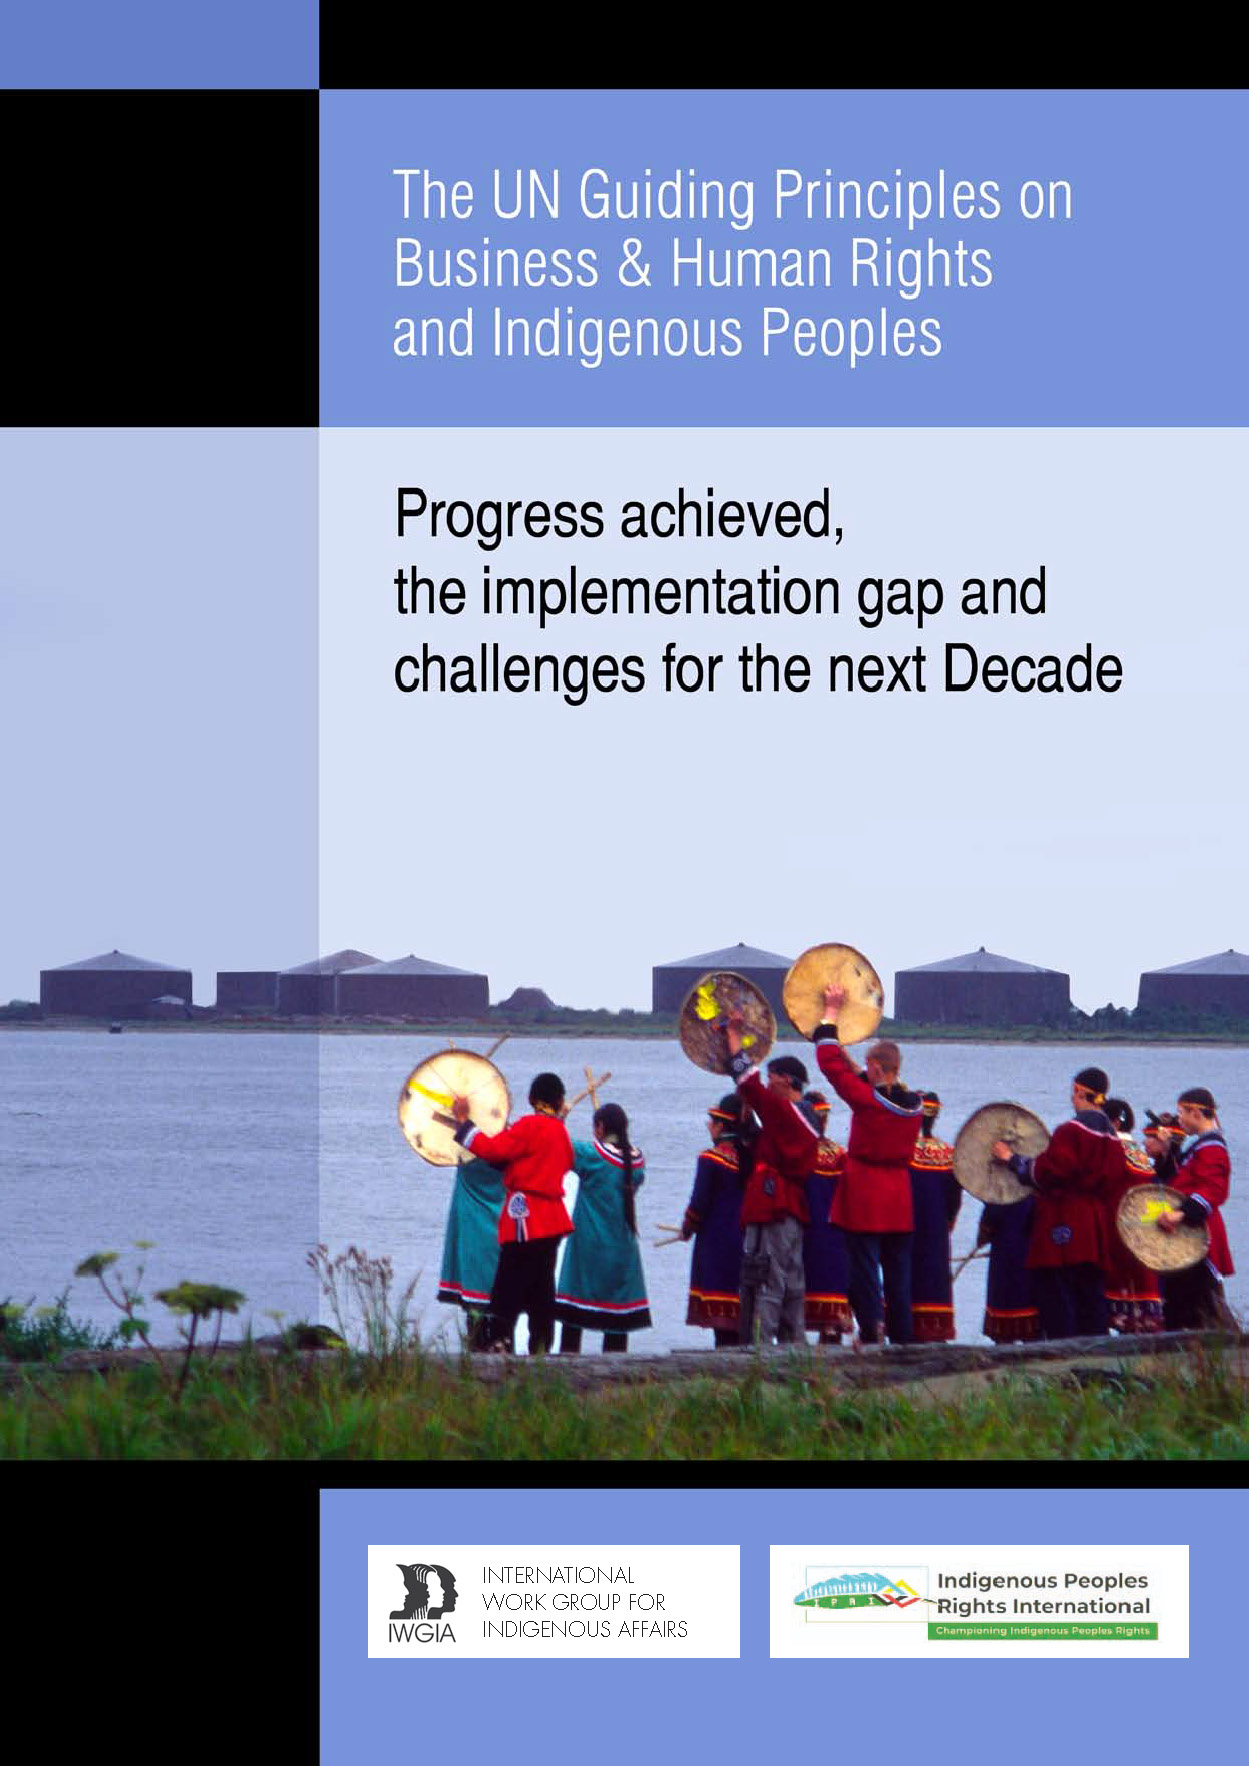 The UN Guiding Principles on Business & Human Rights and Indigenous Peoples – Progress achieved, the implementation gap and challenges for the next Decade